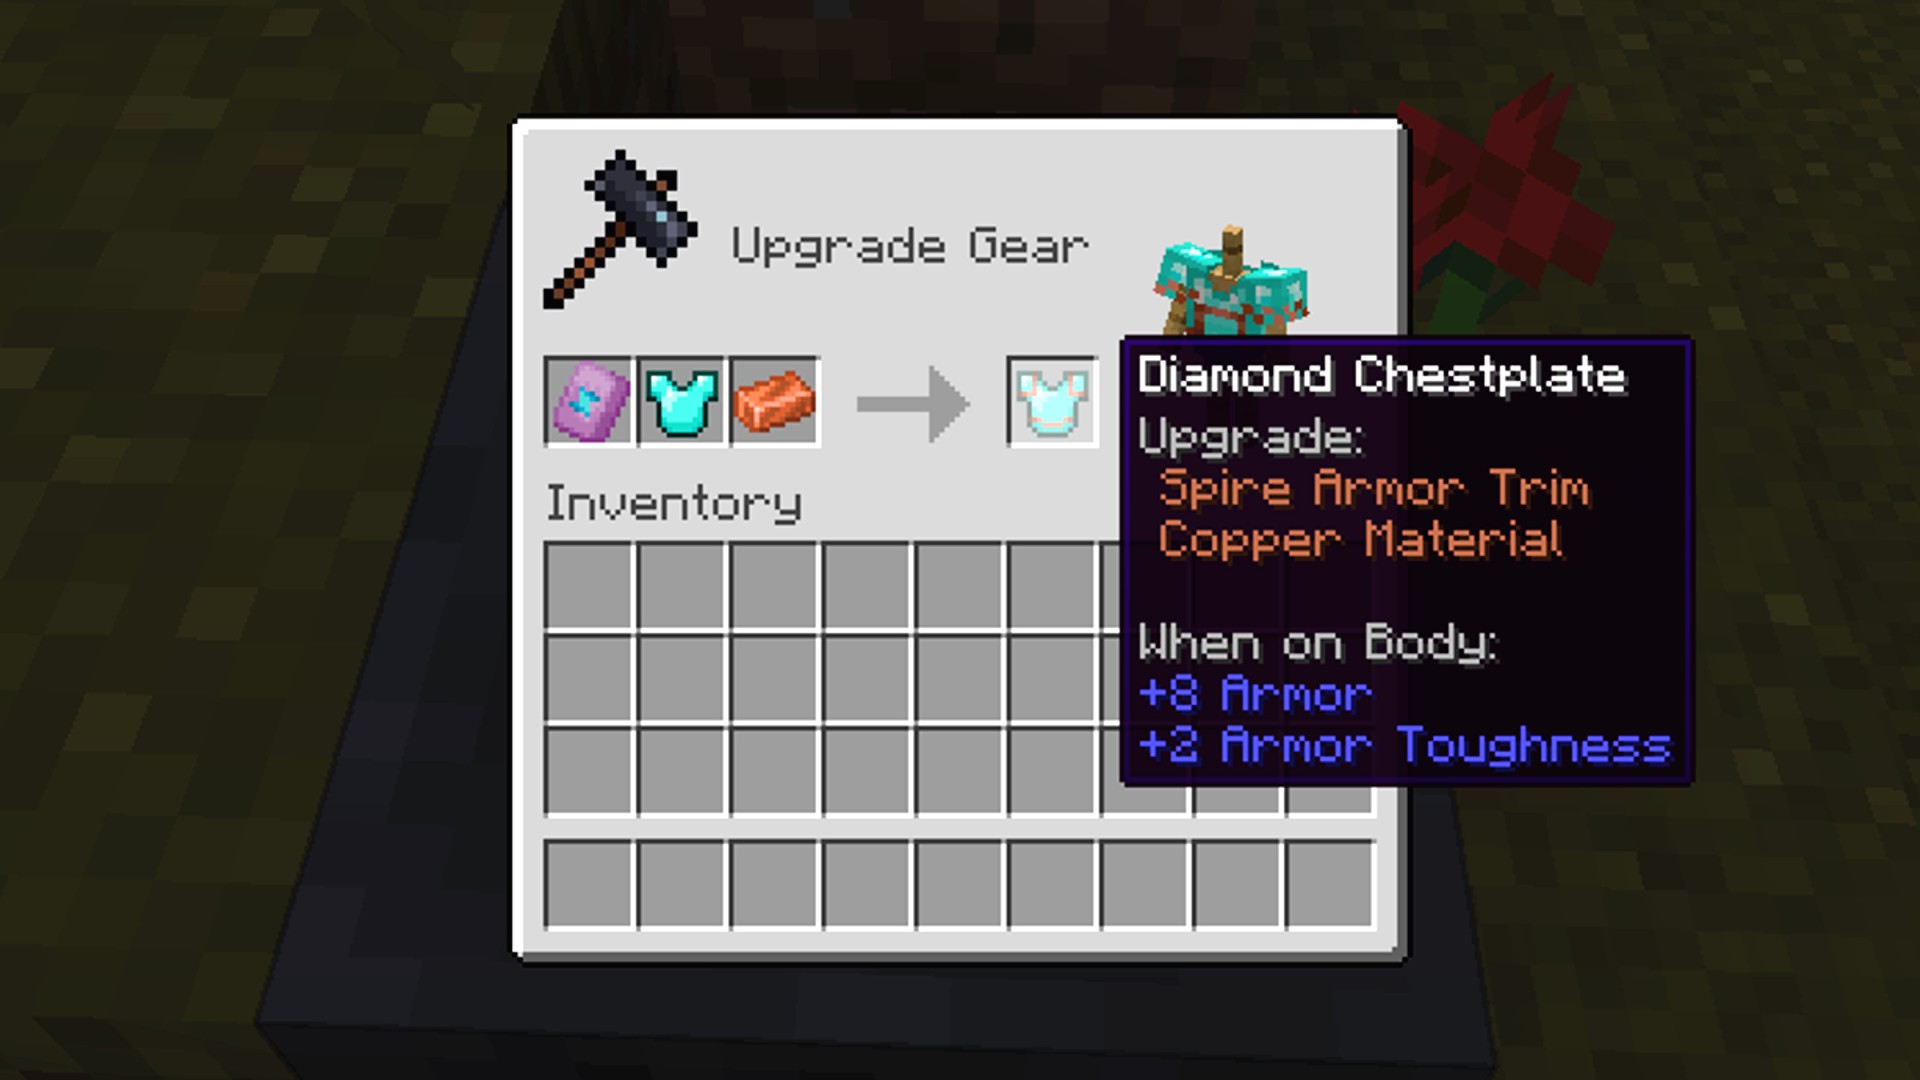 Minecraft armor trims replace methods to discover and use smithing